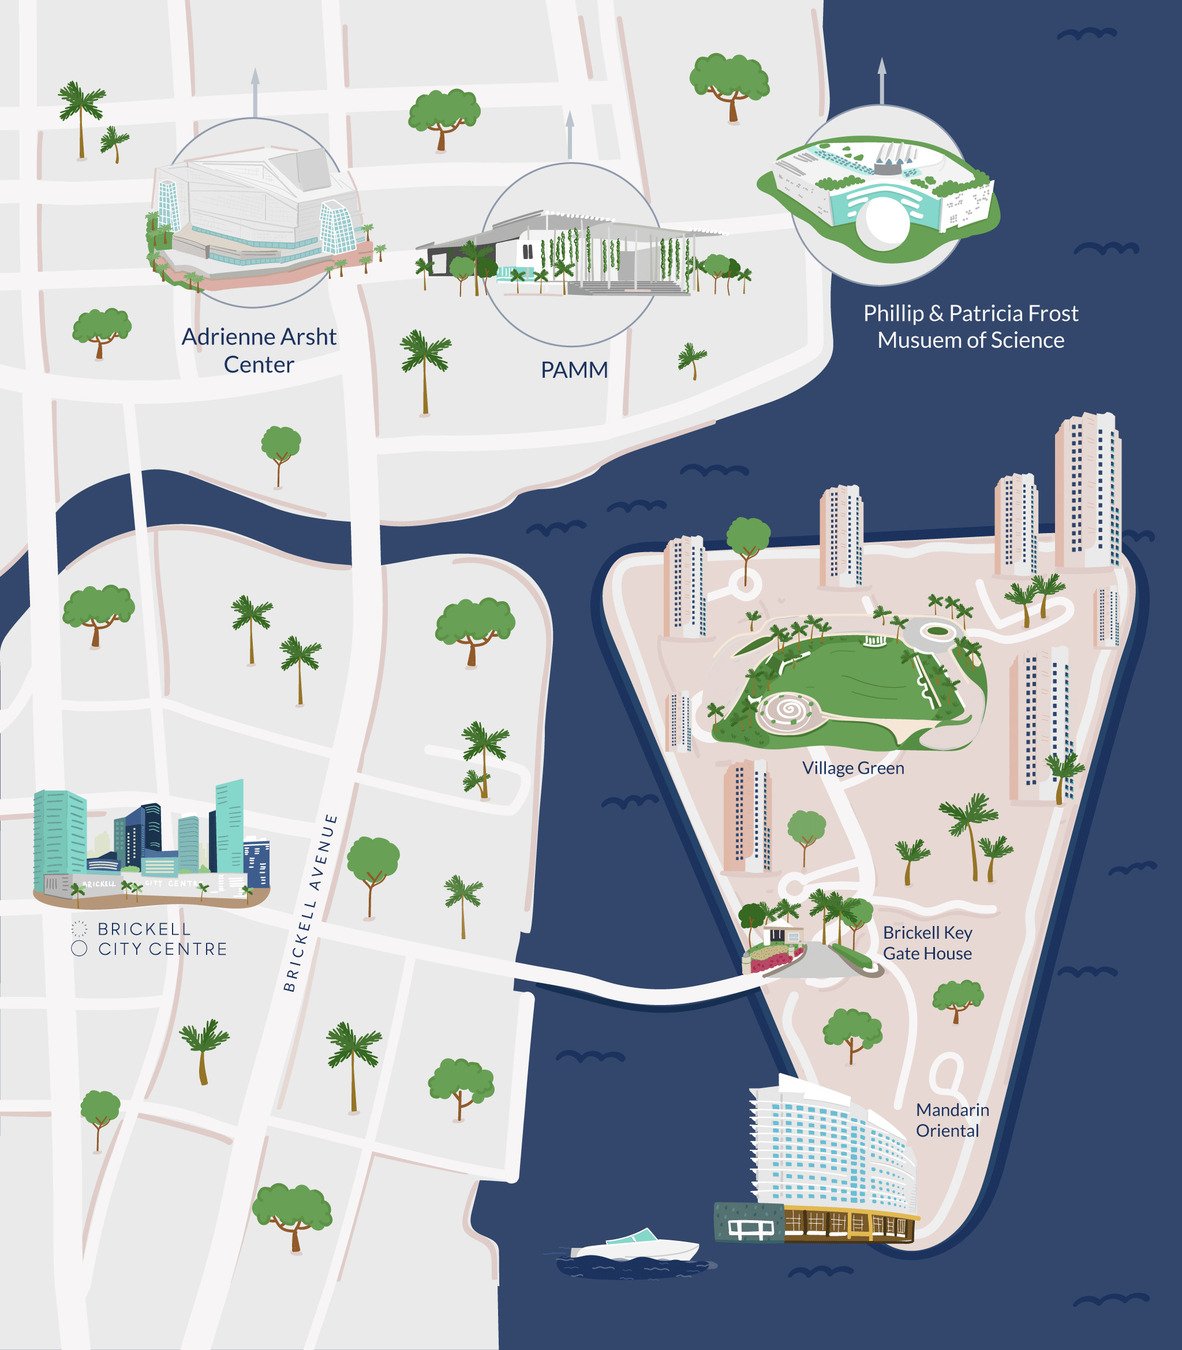 A map of Brickell Key and the surrounding area